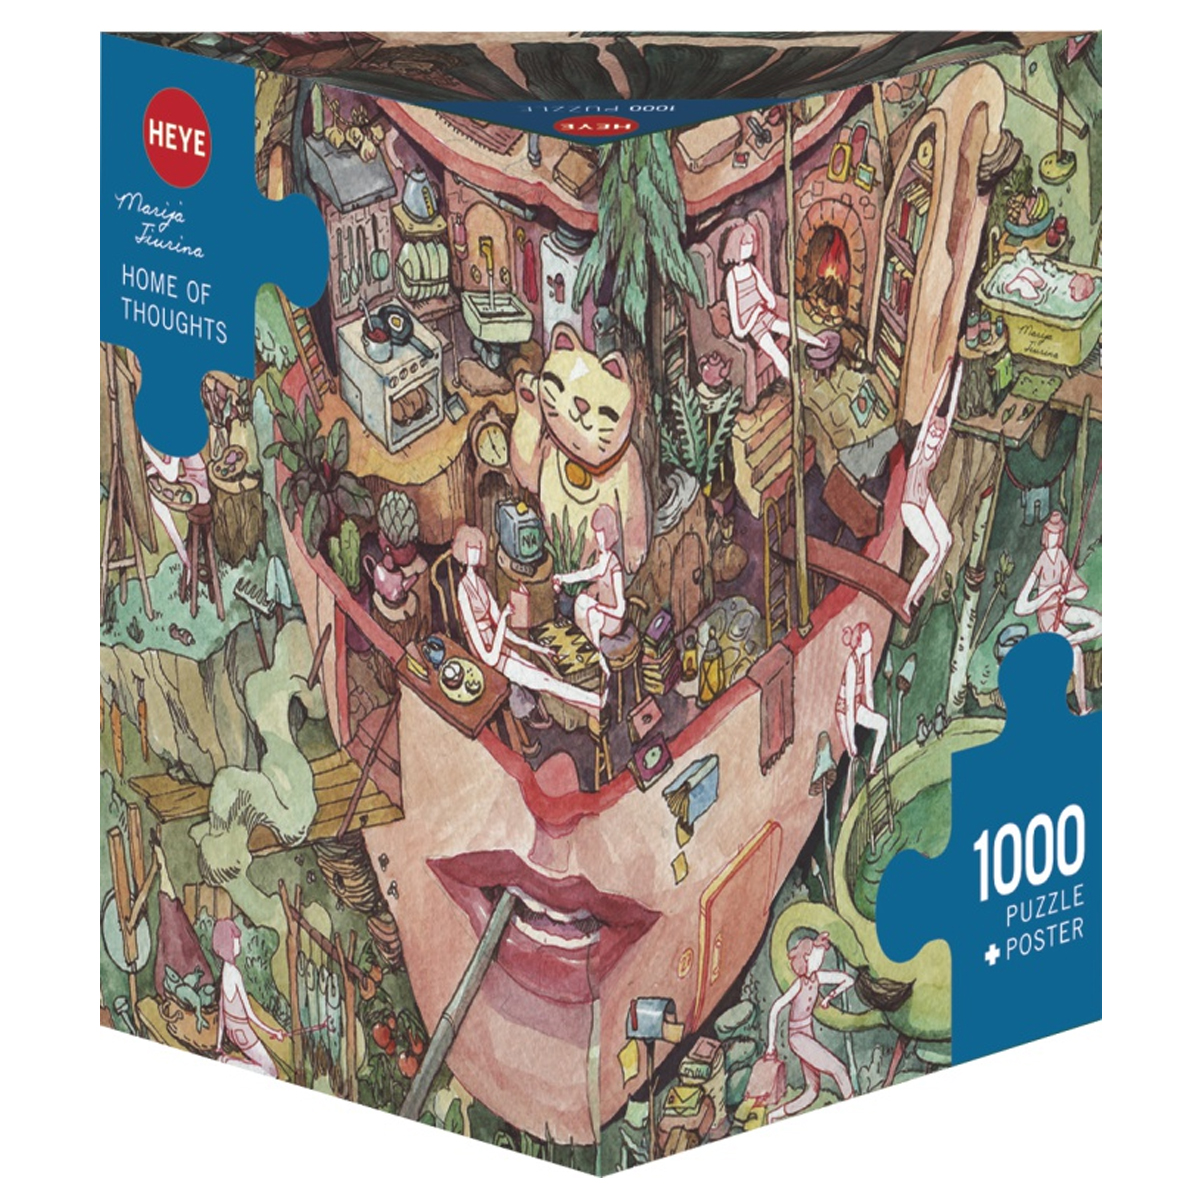 Ravensburger Universal Amblin 2000 Piece Jigsaw Puzzle for Adults - 17152 -  Every Piece is Unique, Softclick Technology Means Pieces Fit Together